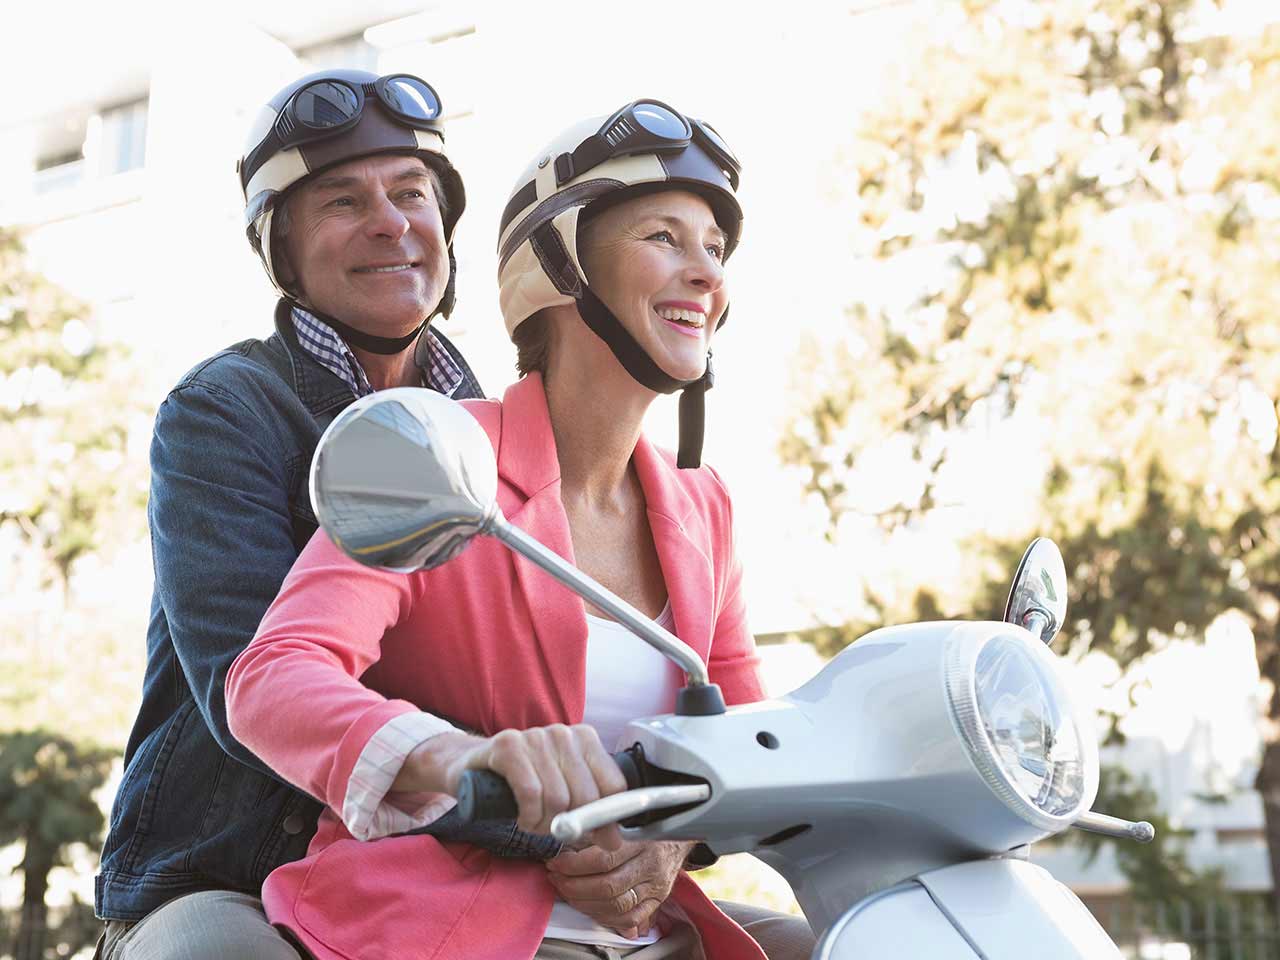 Mature couple on moped